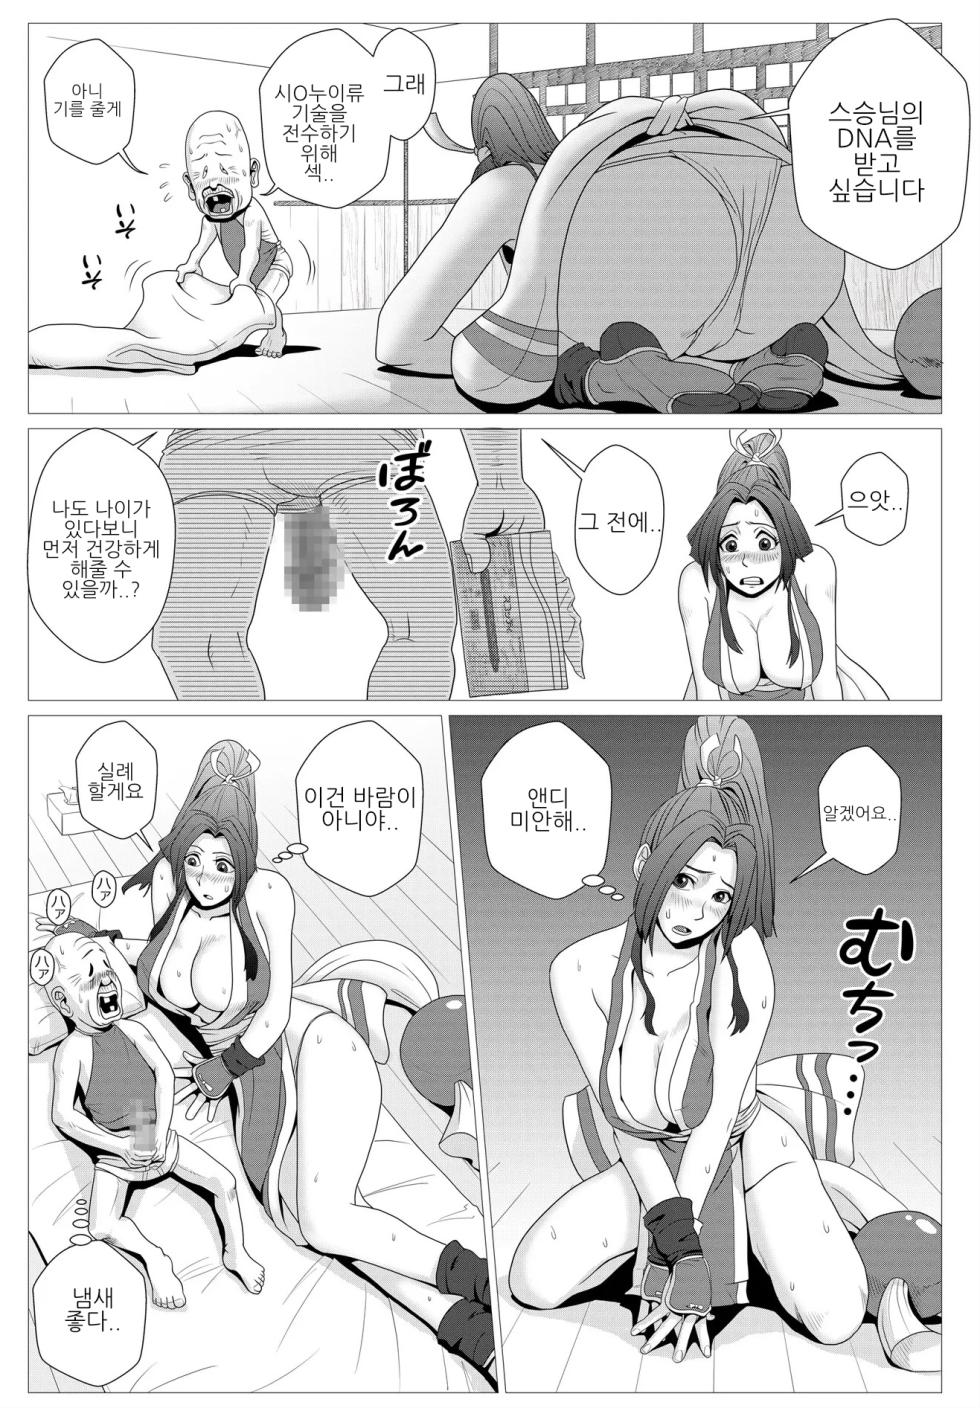 [Falcon115 (Forester)] Maidono | 마이도노 (The King of Fighters) [Korean] [Digital] - Page 4